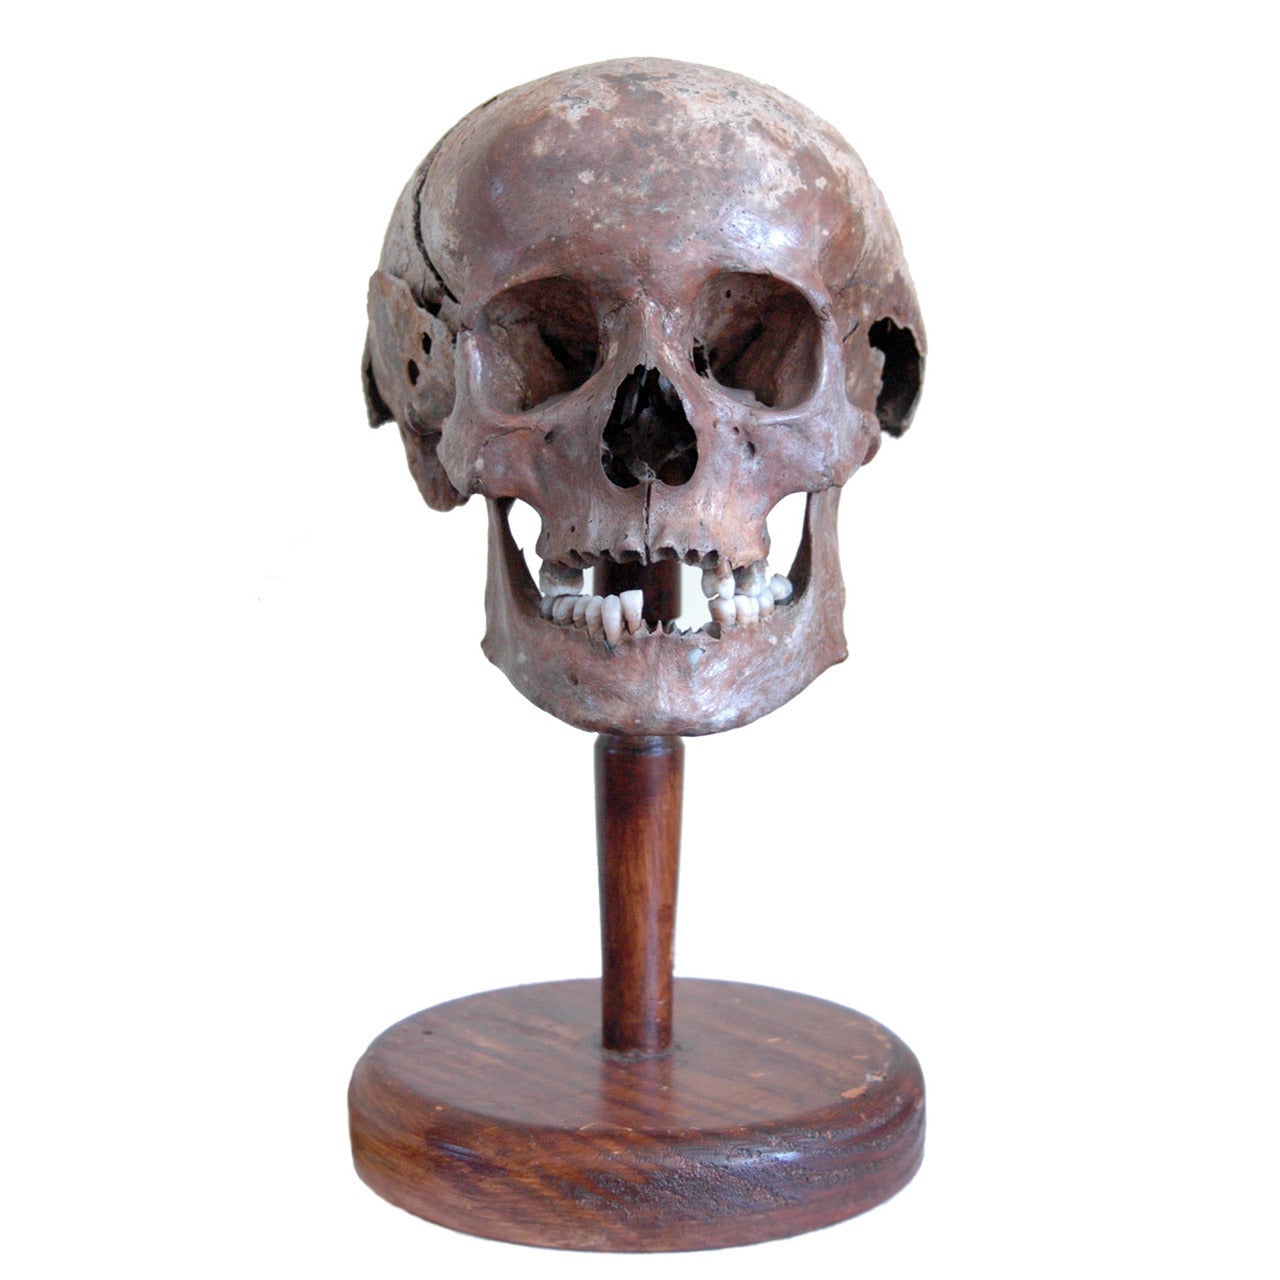 Very Early Example of a Diseased Human Skull